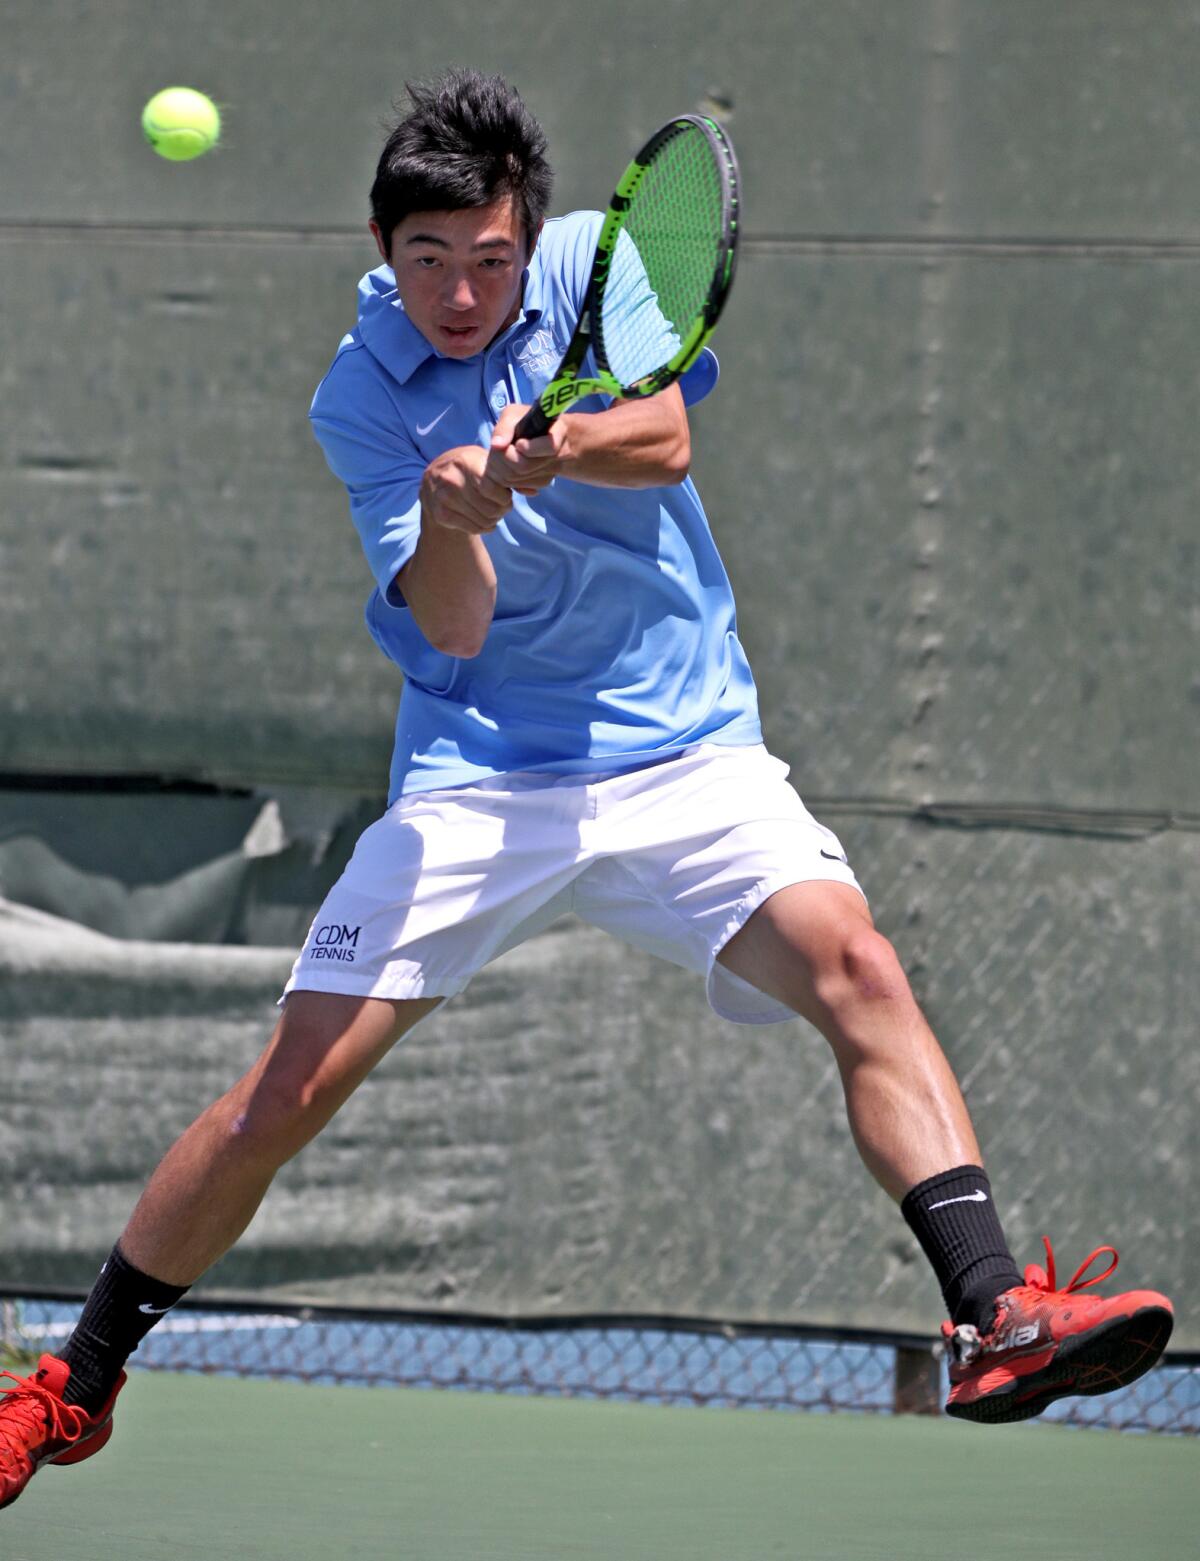 Corona del Mar's Kyle Pham returns the ball in the round of 16 singles match in the CIF Southern Section Individuals tournament against Sage Hill's Emin Torlic at Seal Beach Tennis Center on Wednesday.